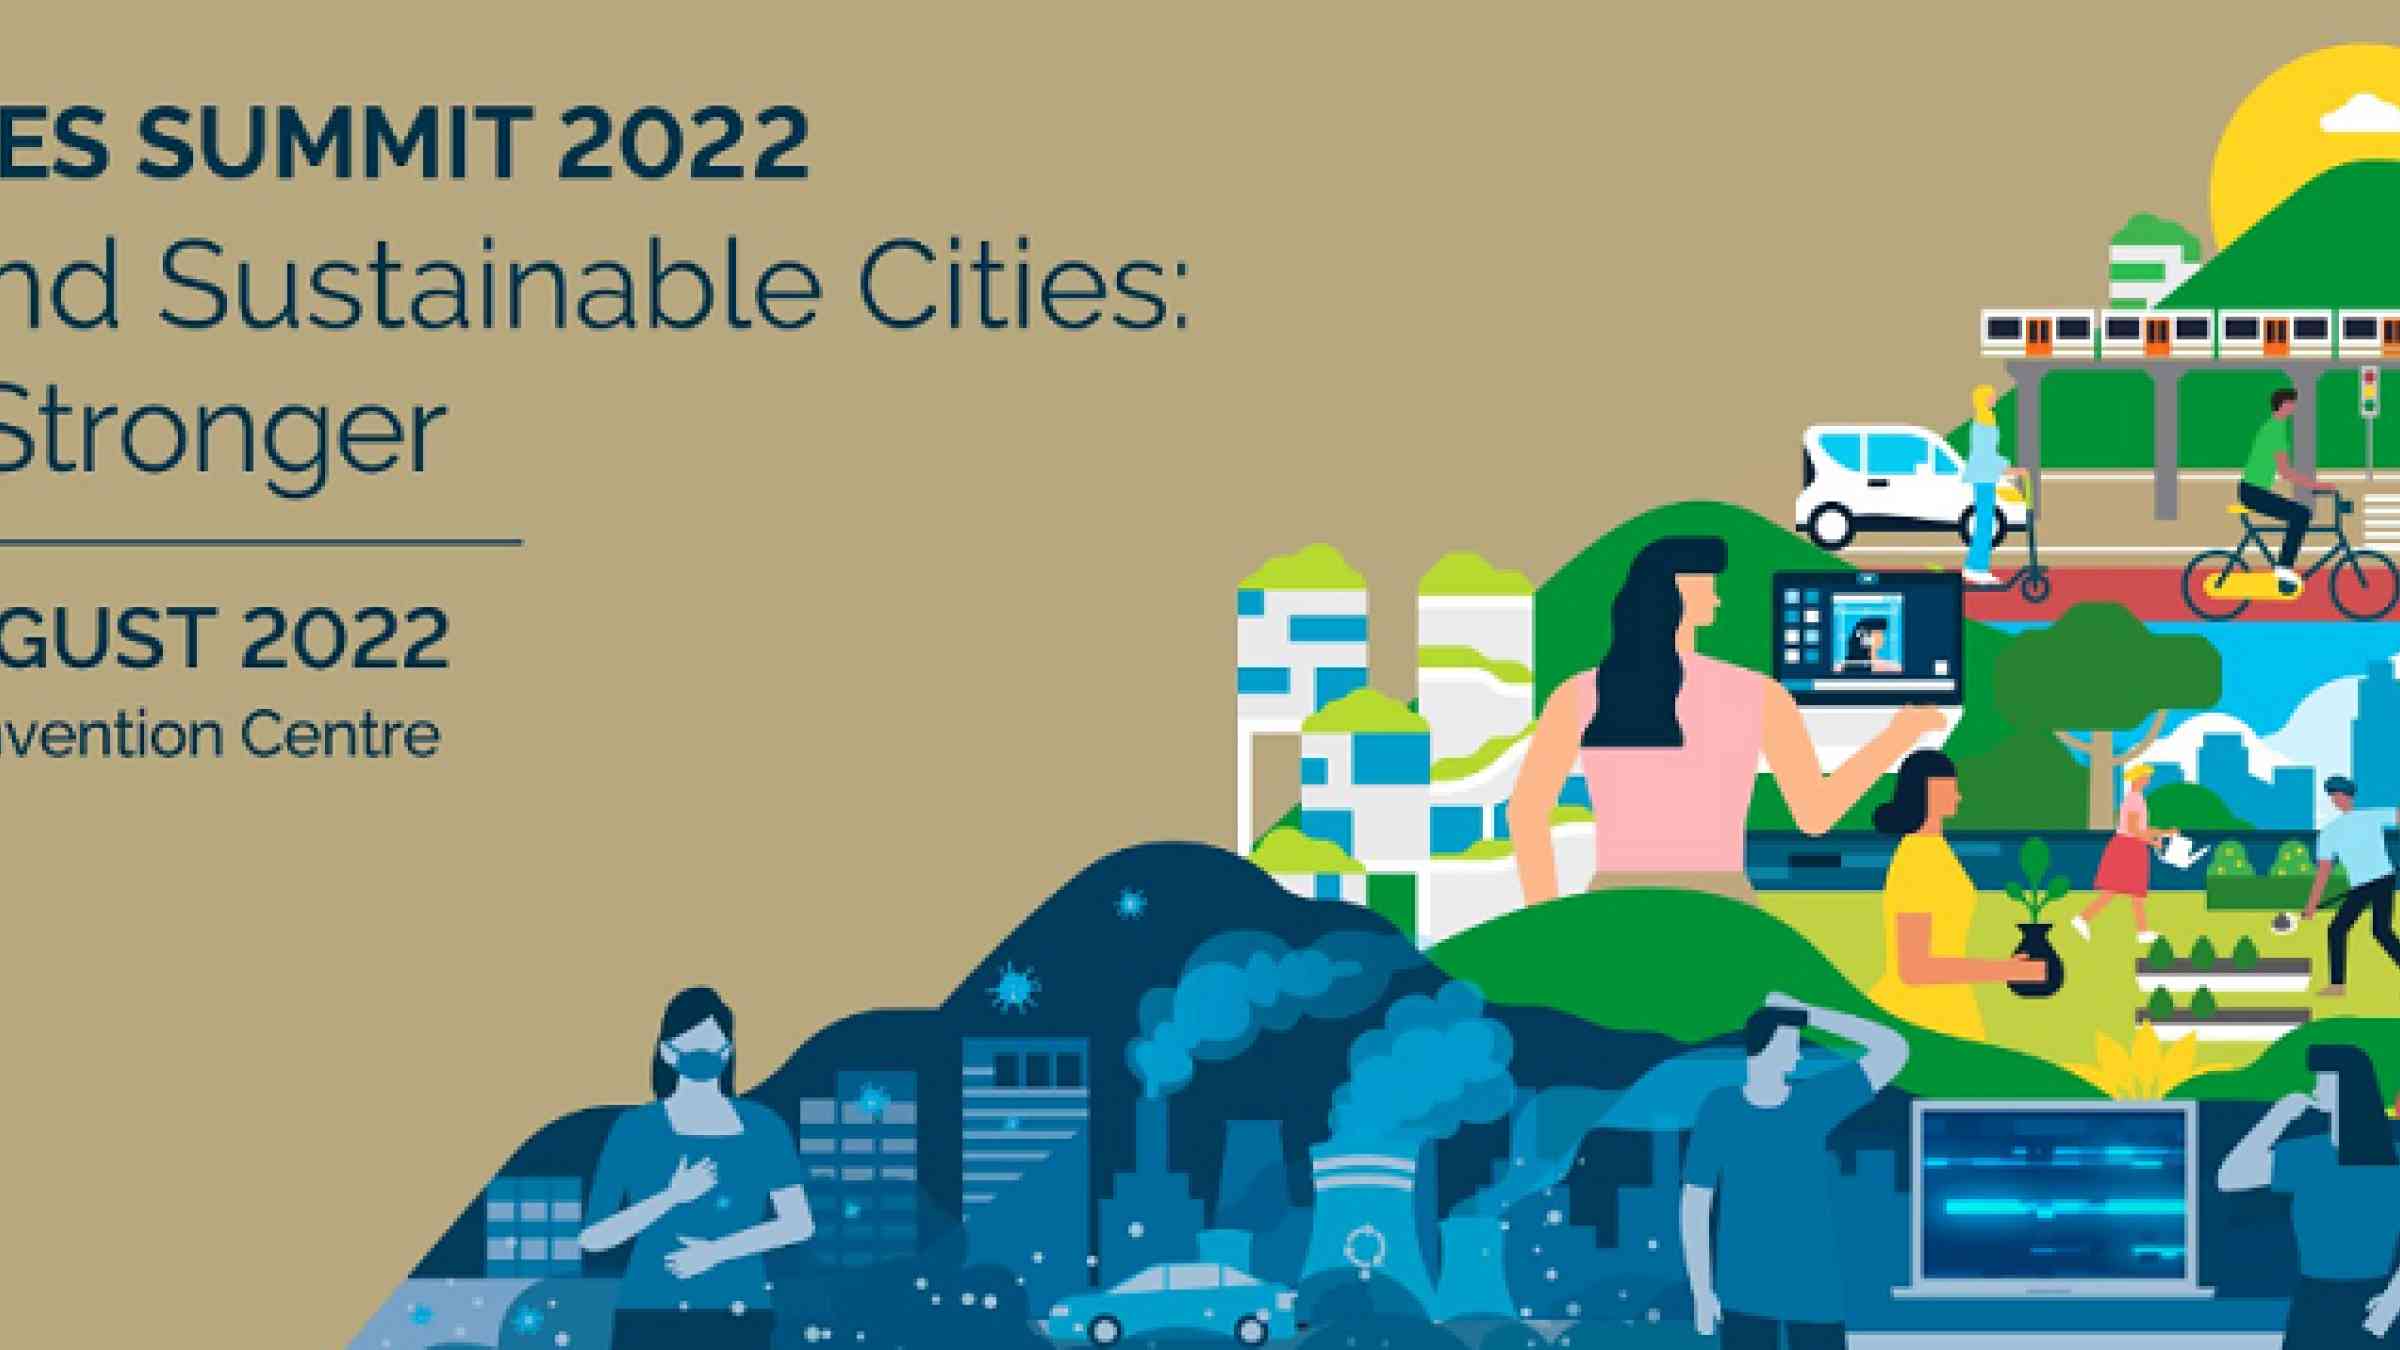 World Cities Summit 2022 Liveable and Sustainable Cities Emerging